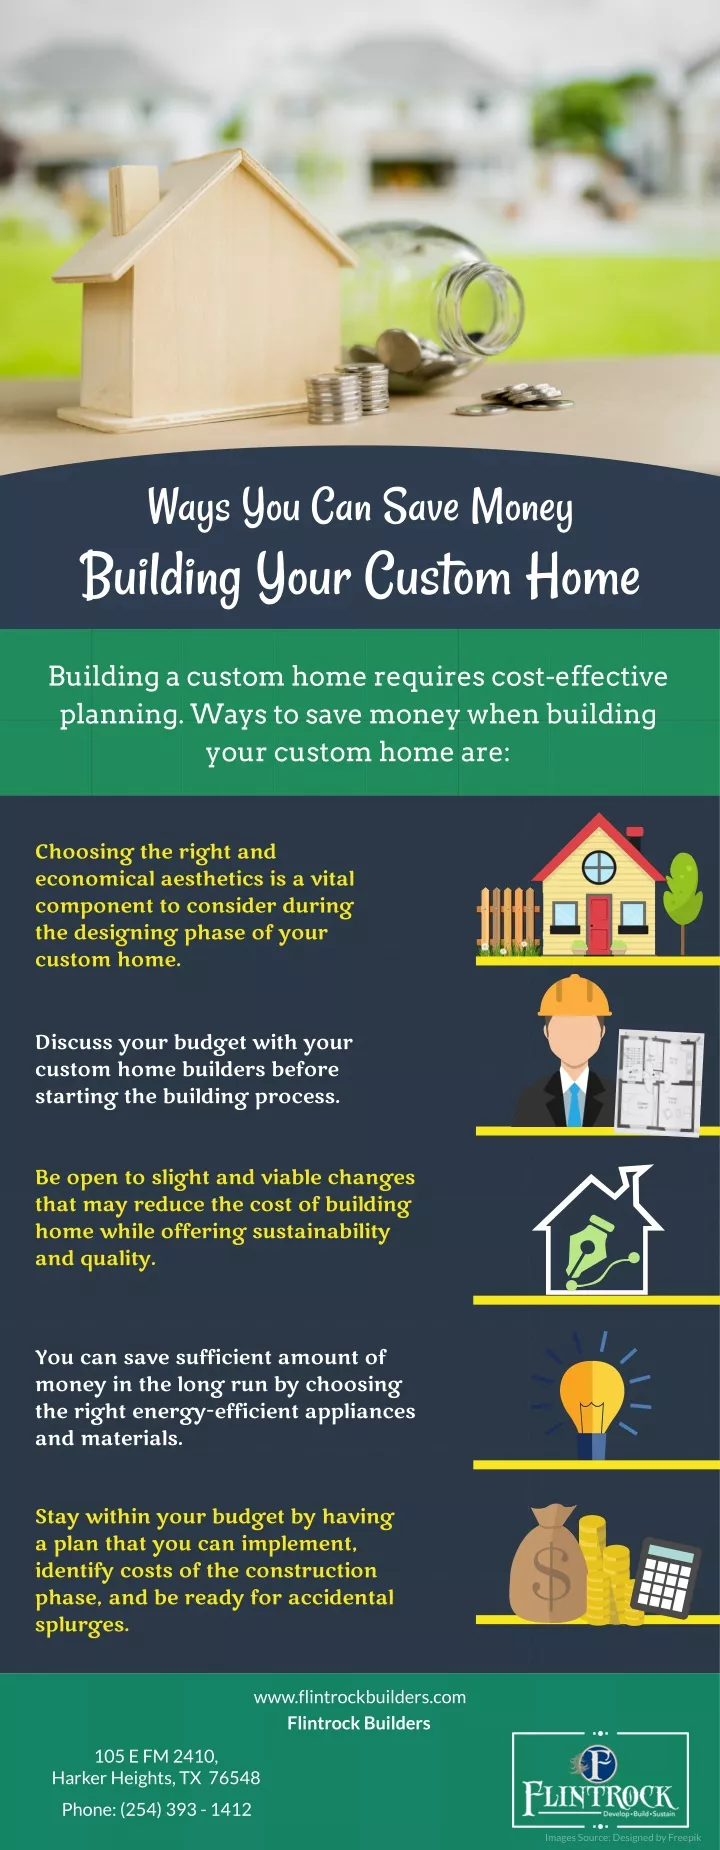 ways you can save money building your custom home